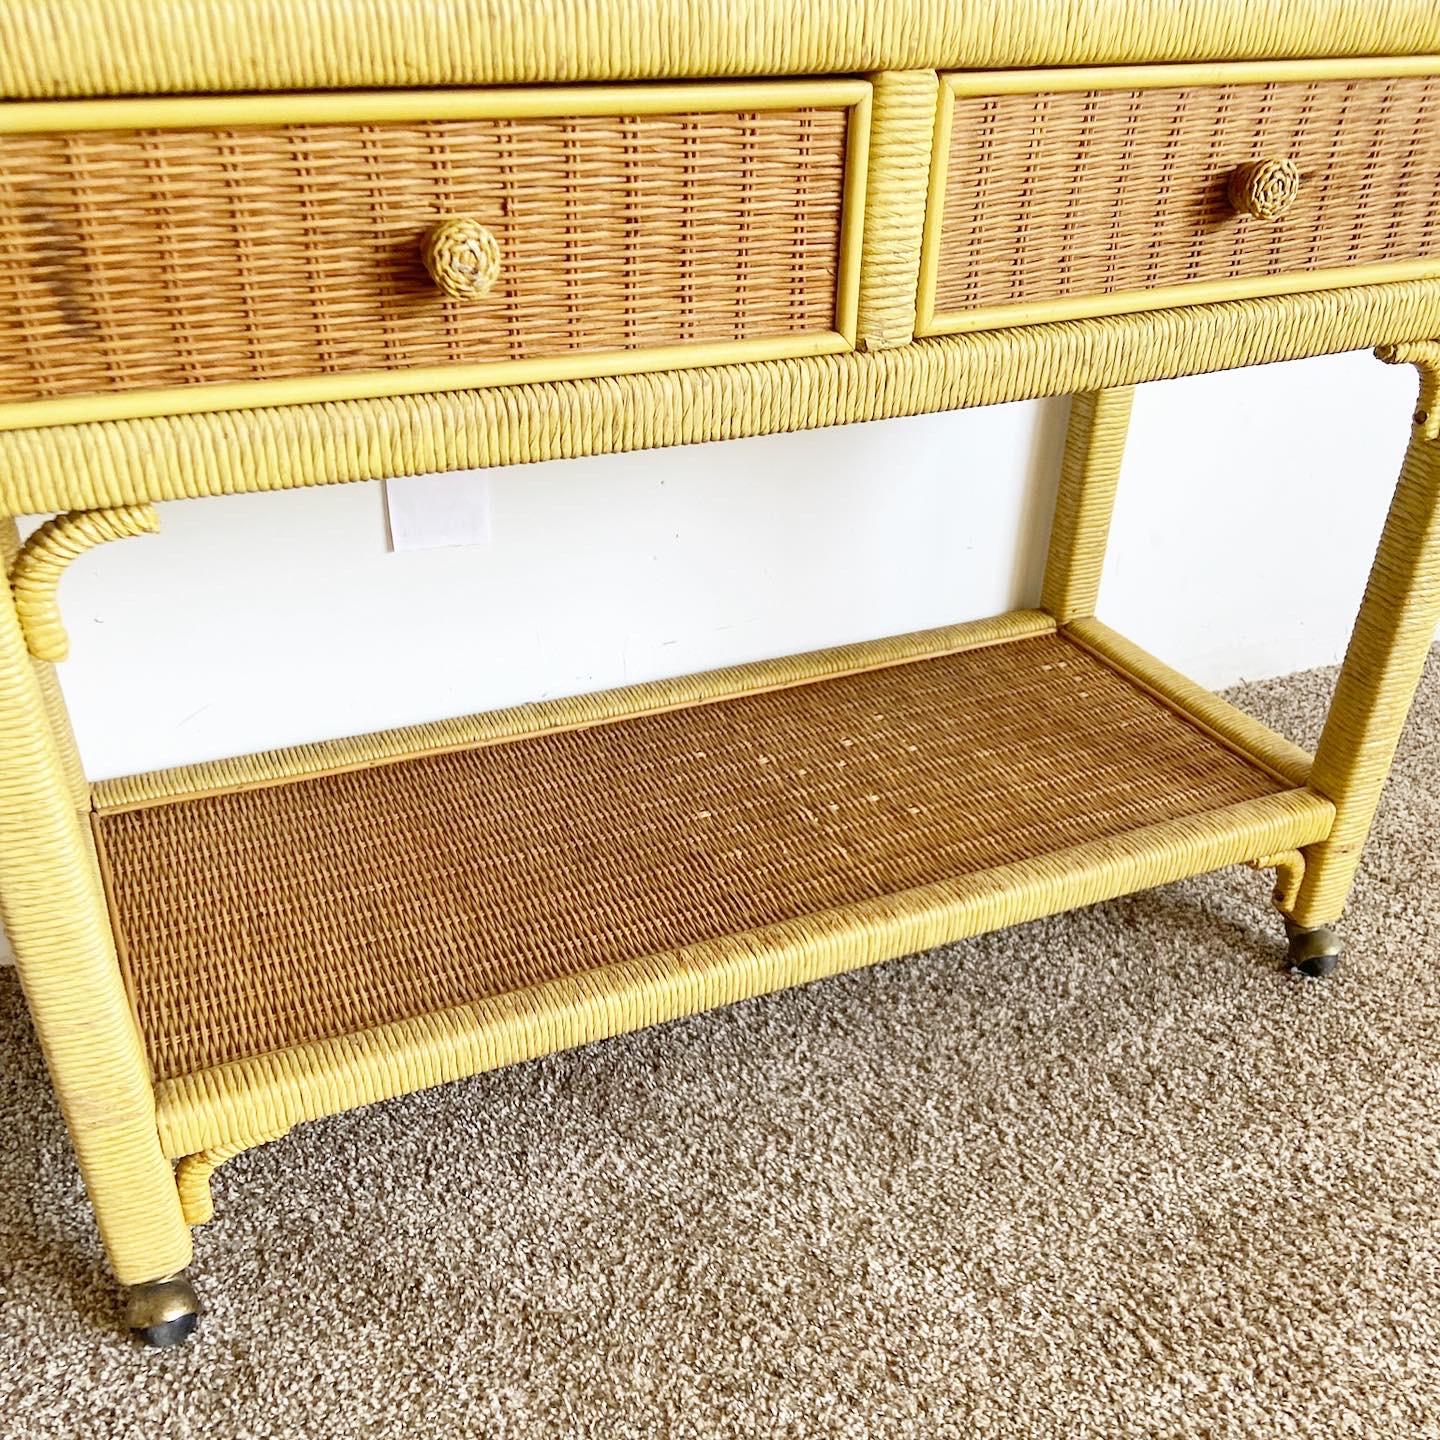 Late 20th Century Boho Chic Henry Link Wicker Rattan Bar Cart on Casters For Sale